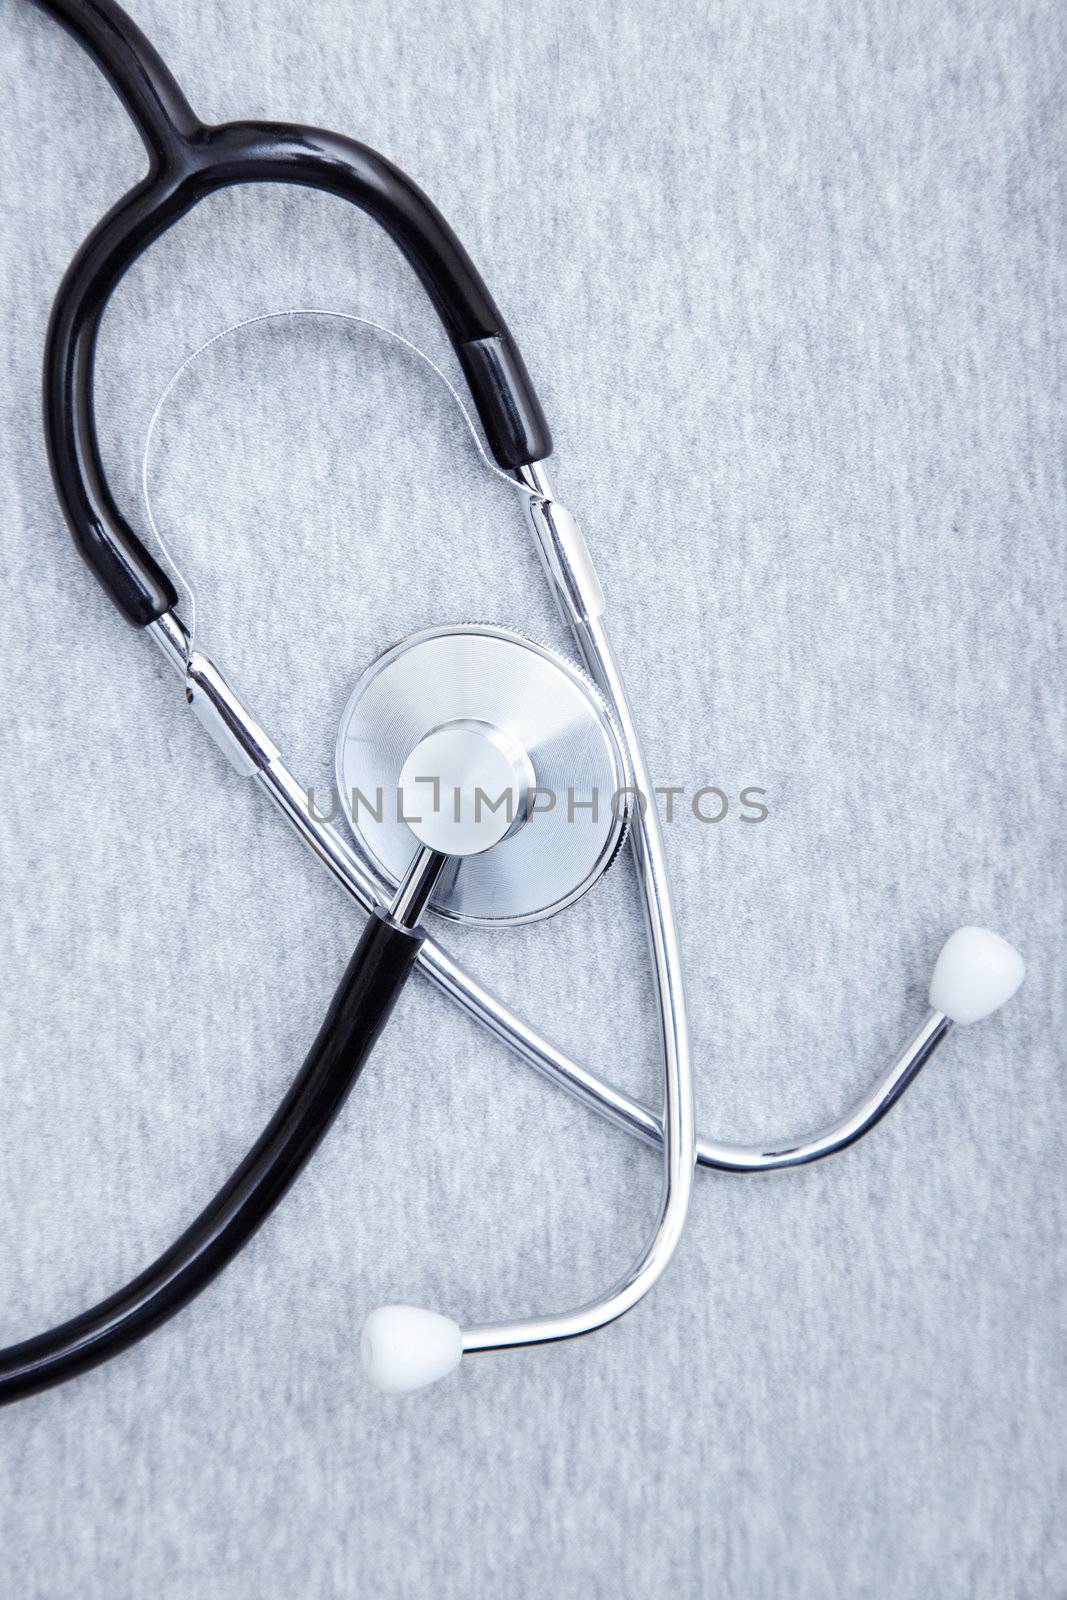 Medical stethoscope on a textured background. Close-up photo